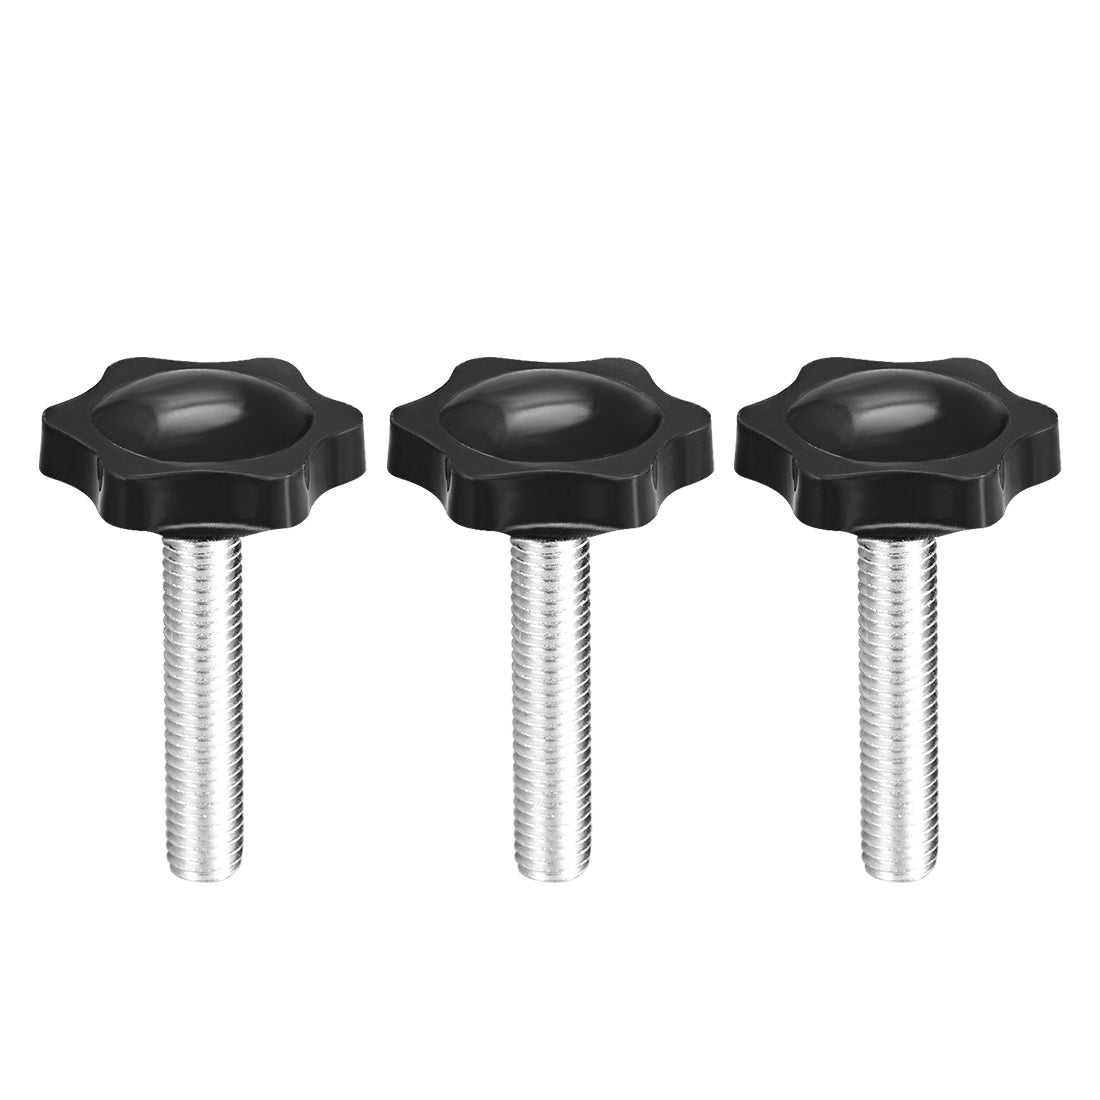 uxcell Uxcell Clamping Handle Gripandles Screw Knobs Handgrips Star Knob  Male Thread 3 pcs